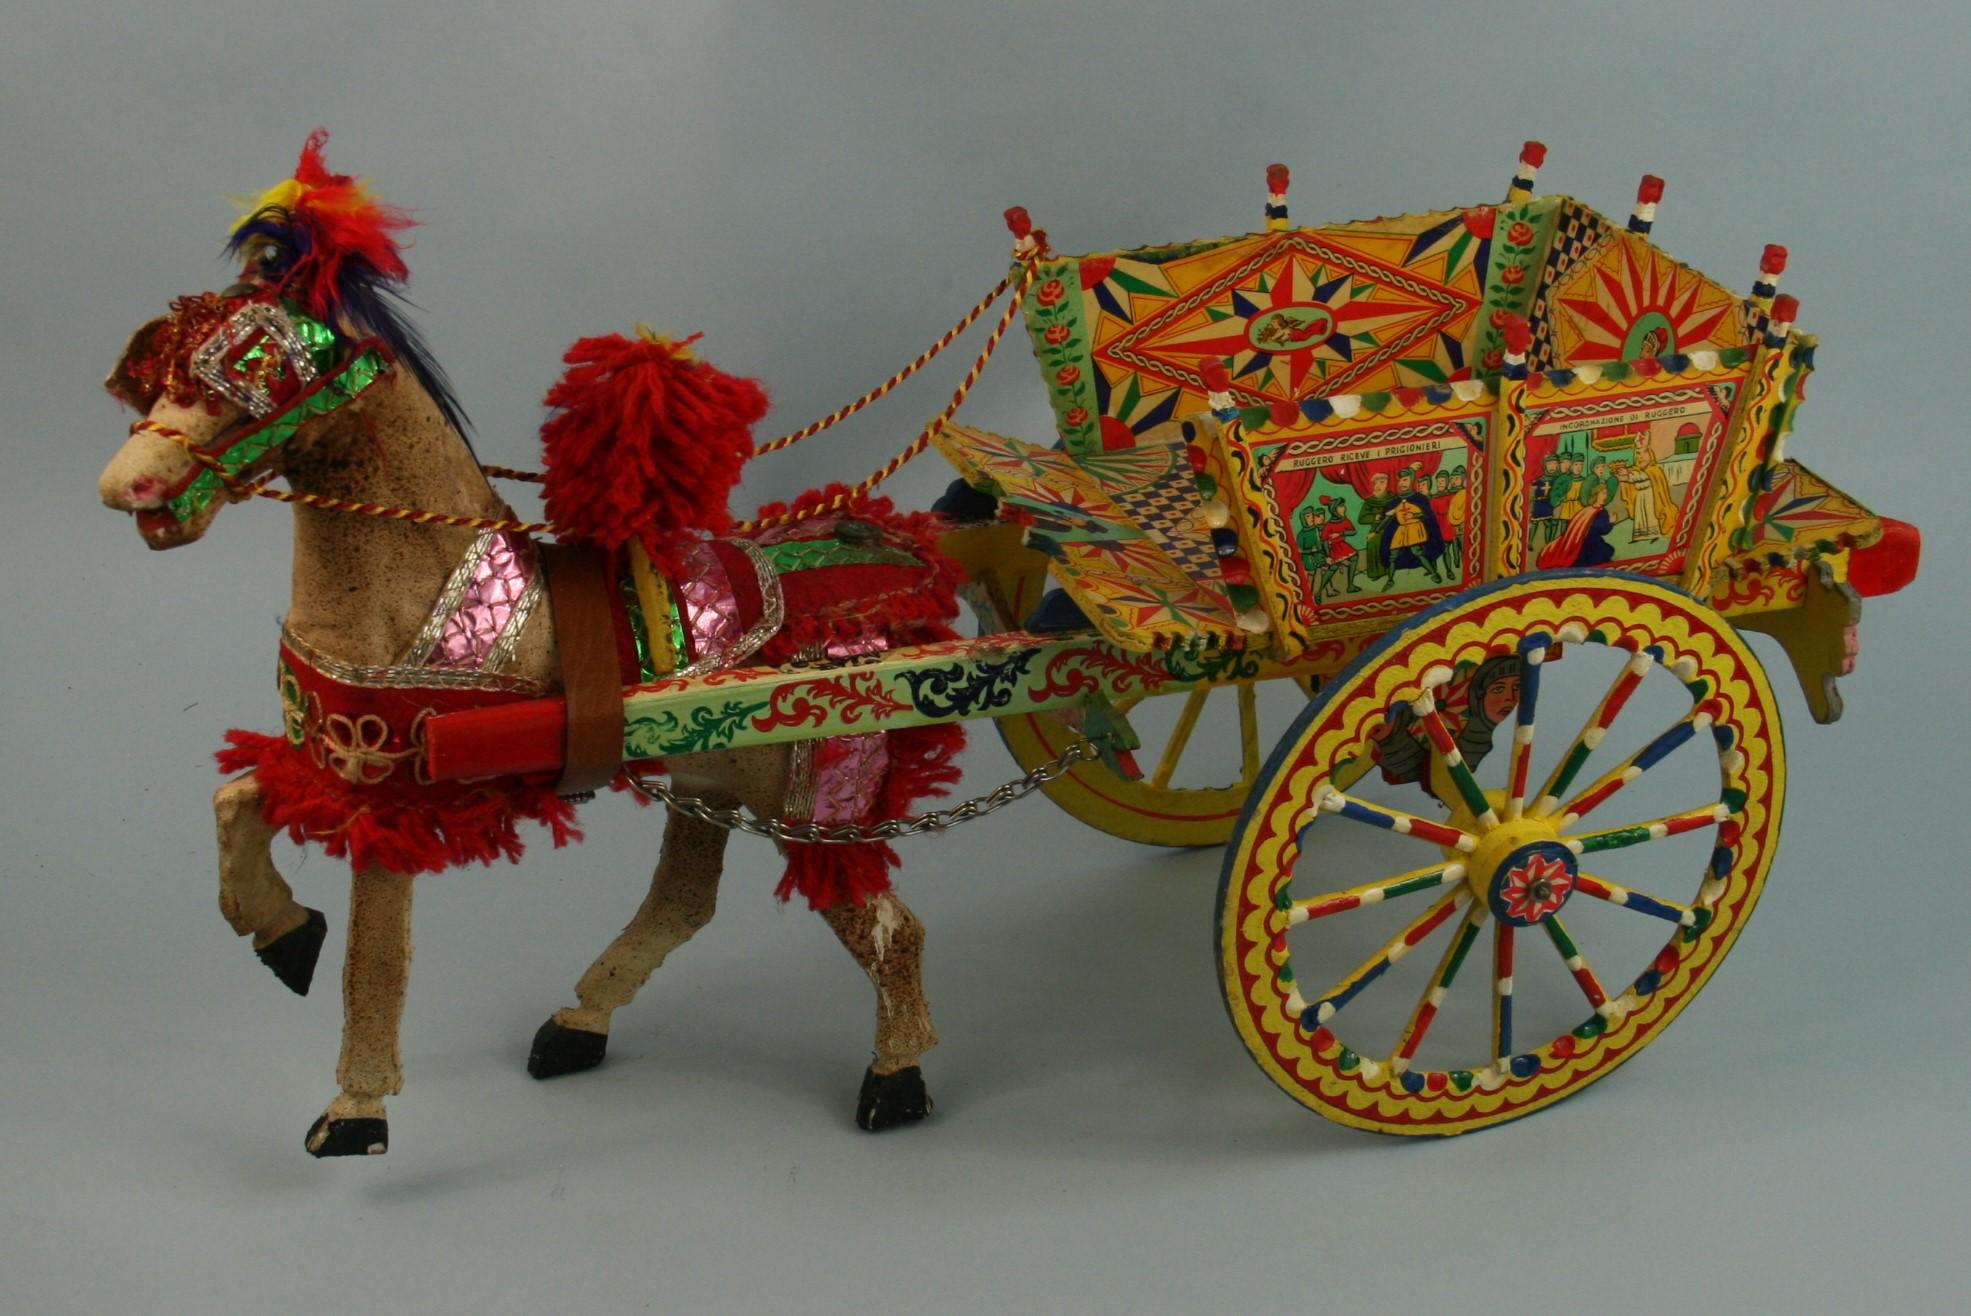 3-524 hand crafted model of a Sicilian cart
Some parts are hand painted others are prints applied to wood.